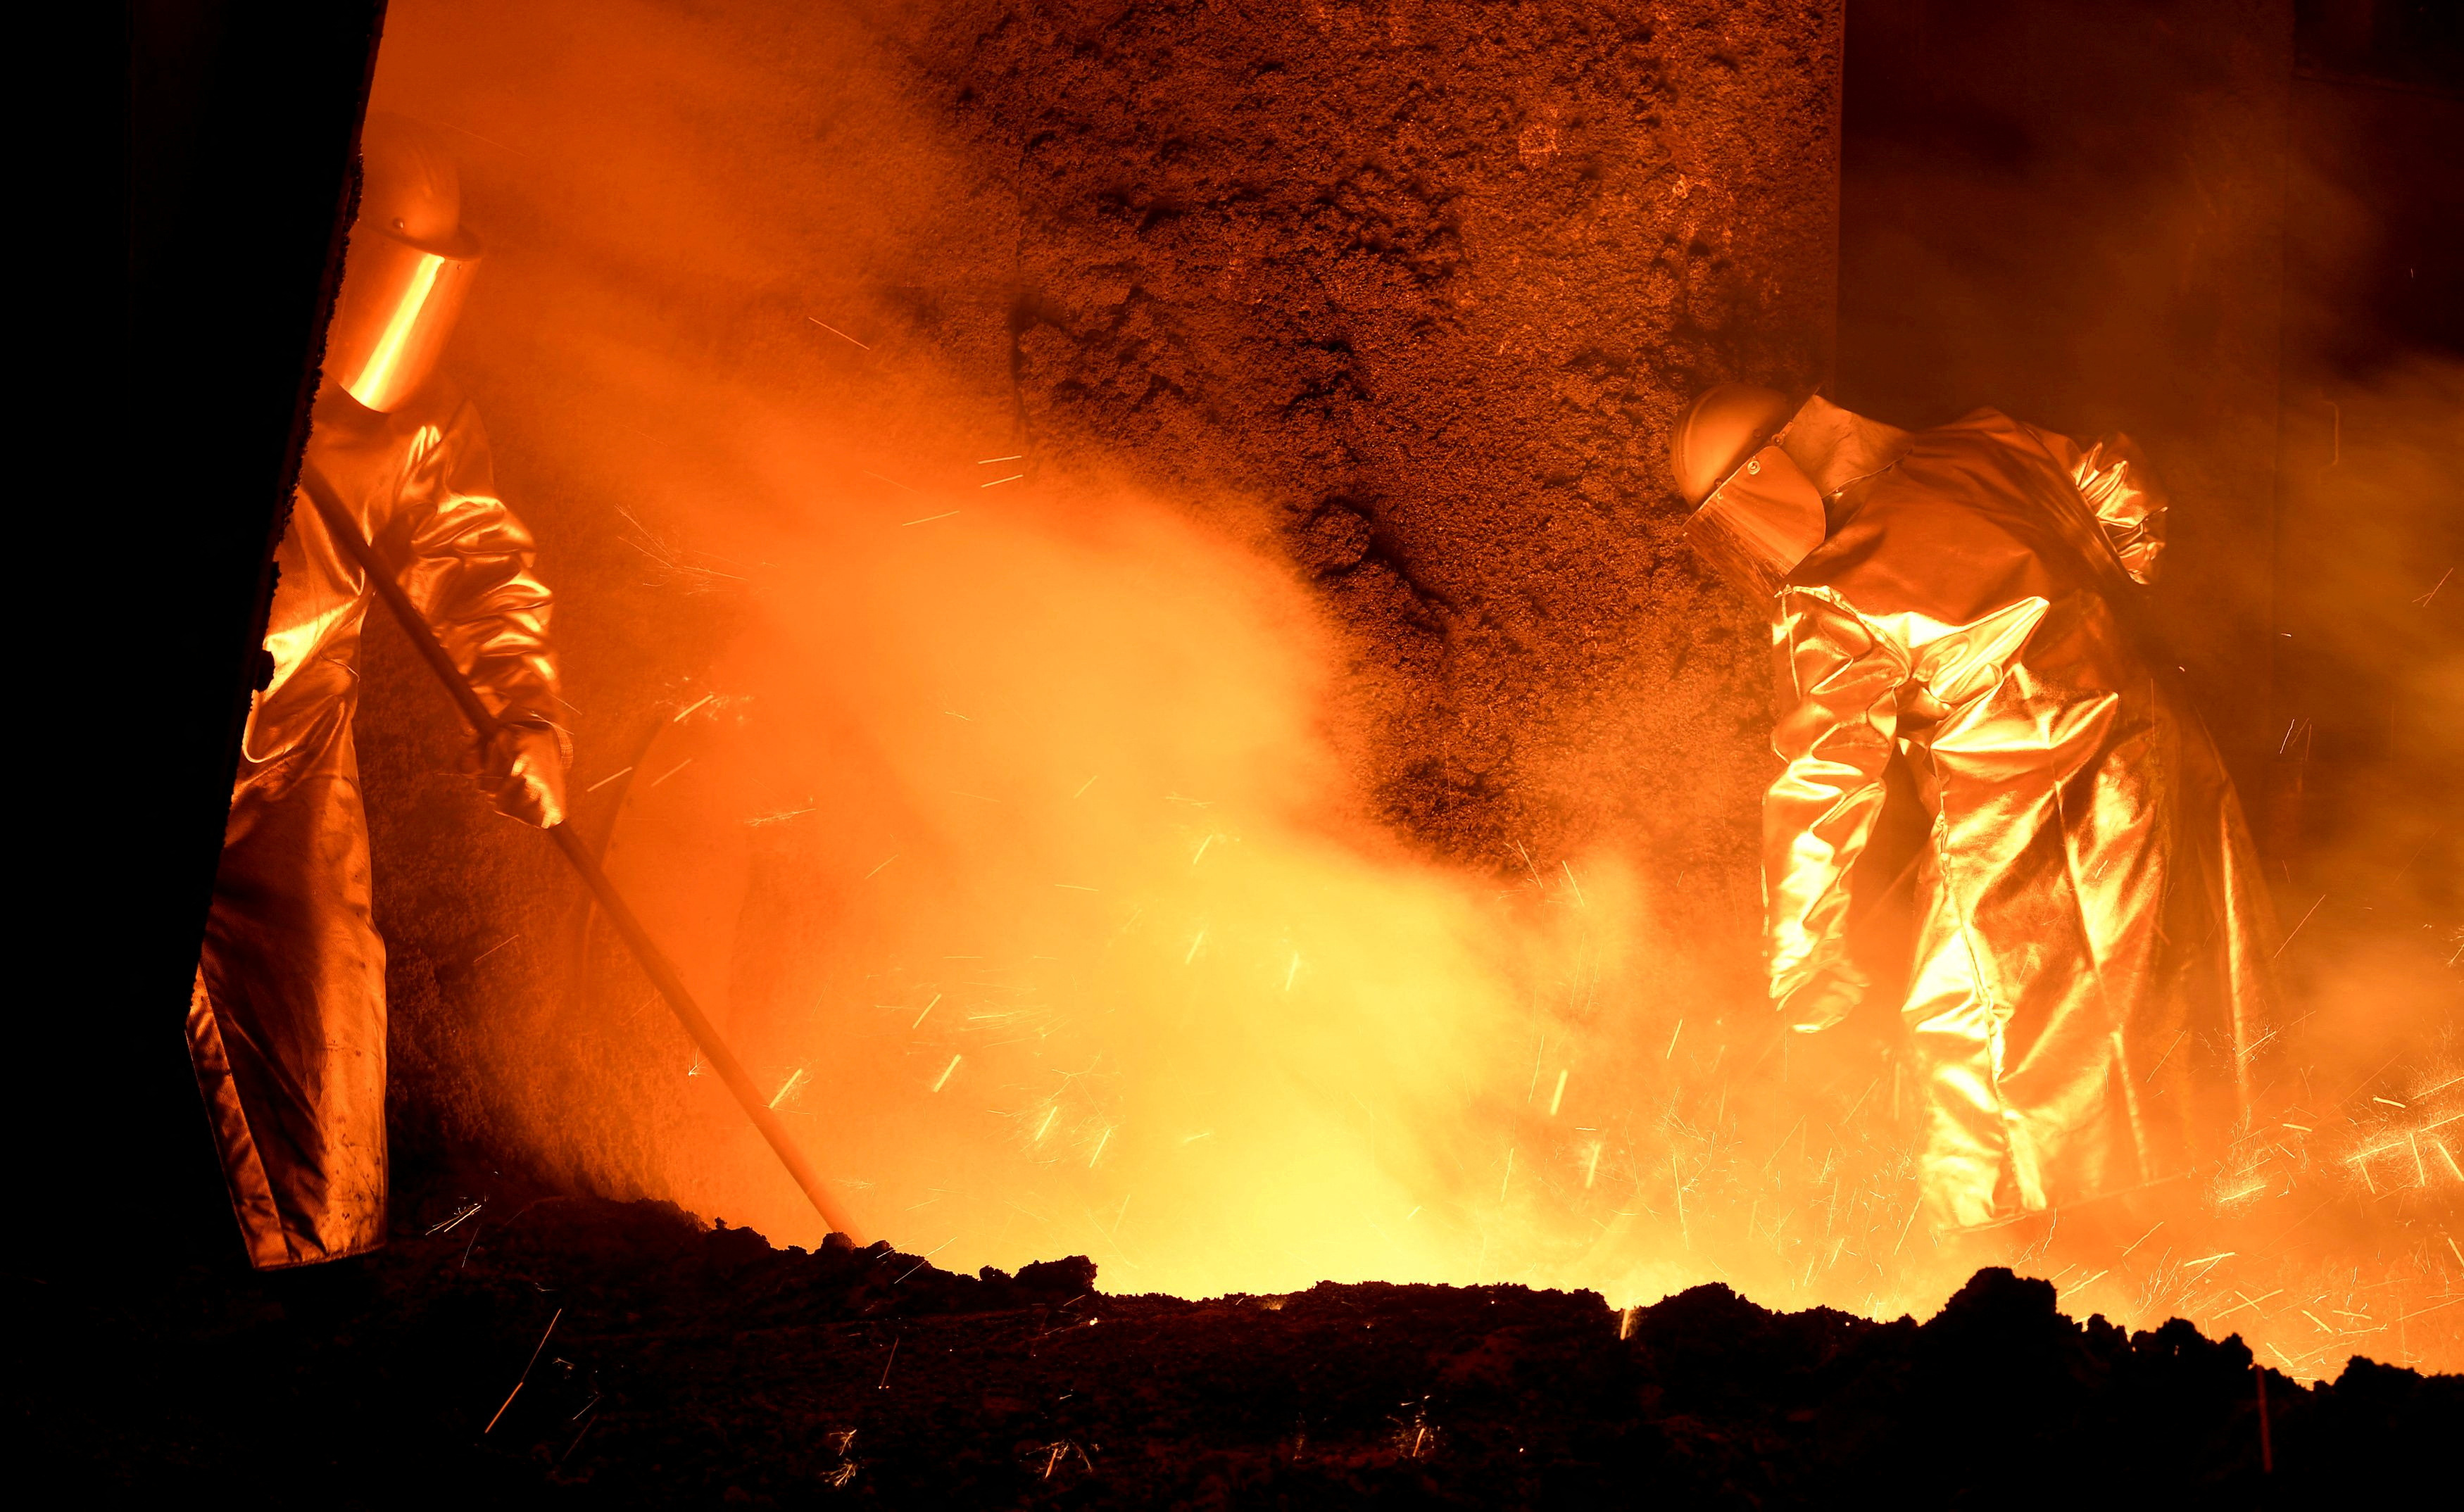 Steelworkers stand at a furnace at the plant of German steel company Salzgitter AG in Salzgitter